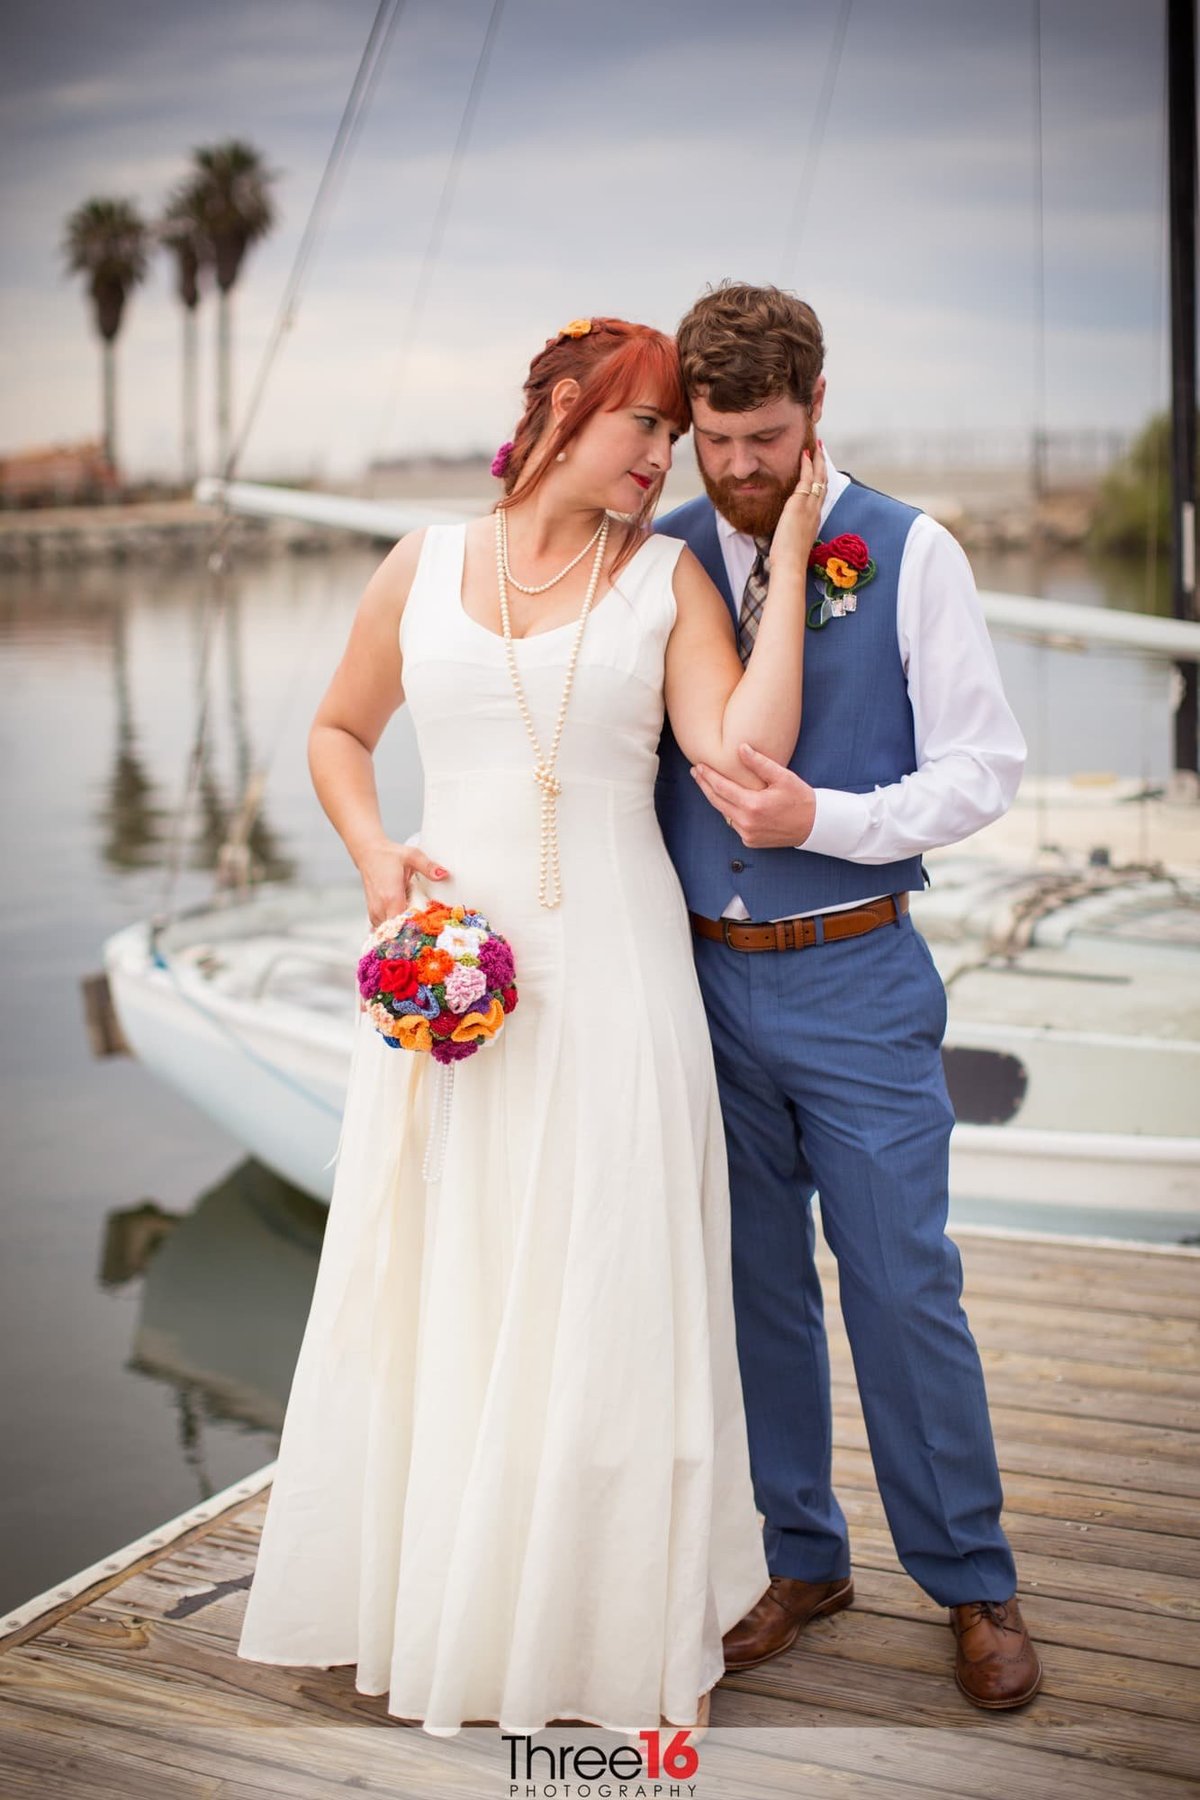 Sweet tender moment between newly married couple standing on the dock